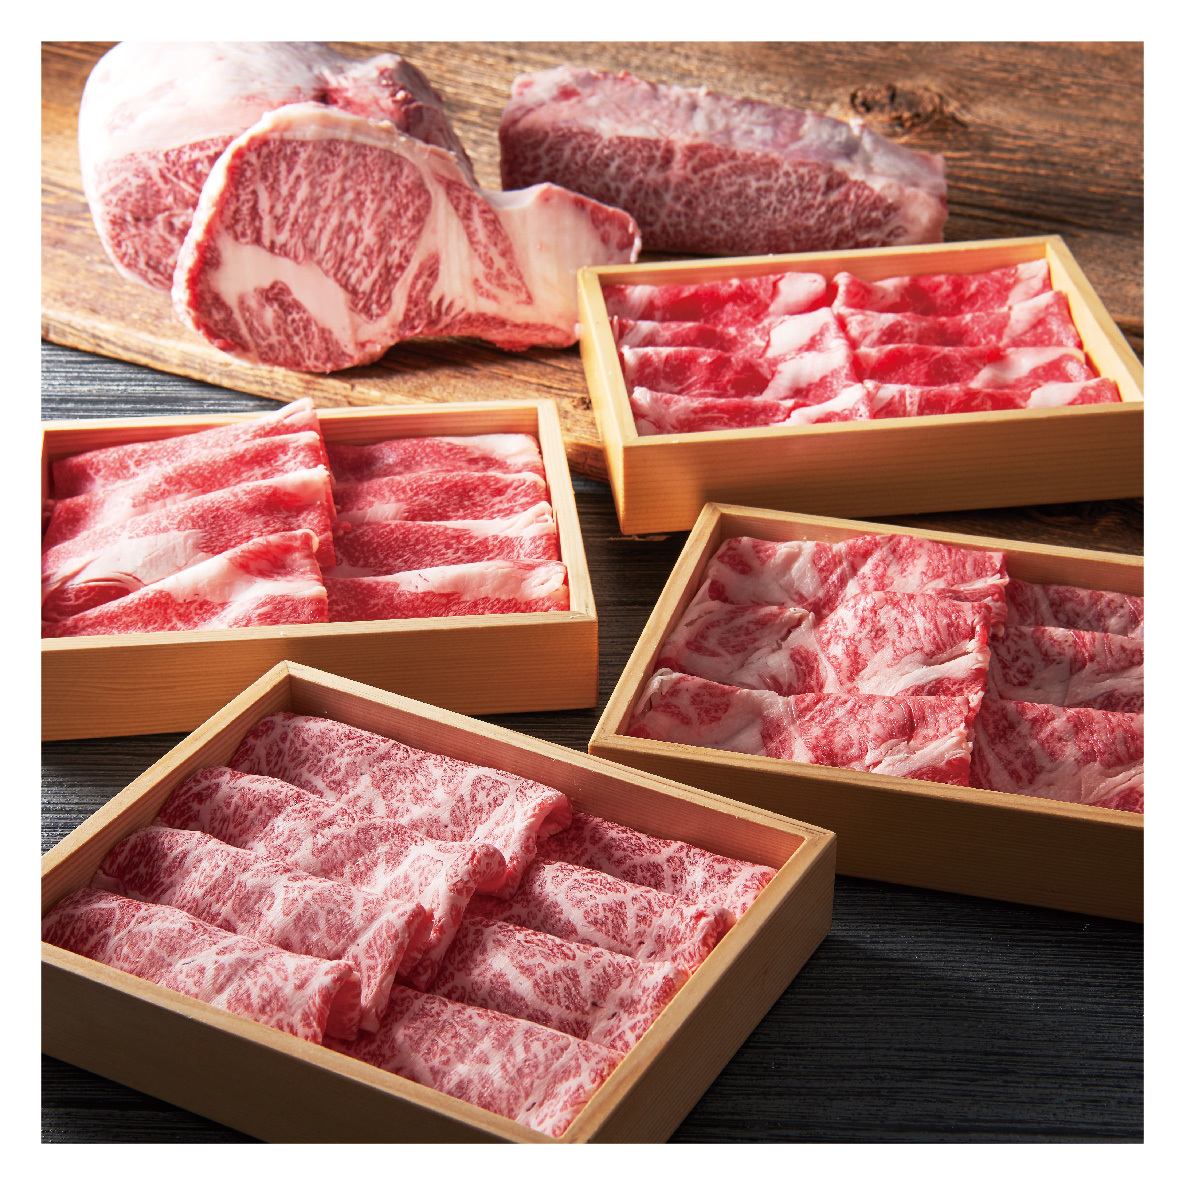 The thickness of the meat is carefully sliced, sticking to the optimum thickness for shabu-shabu!